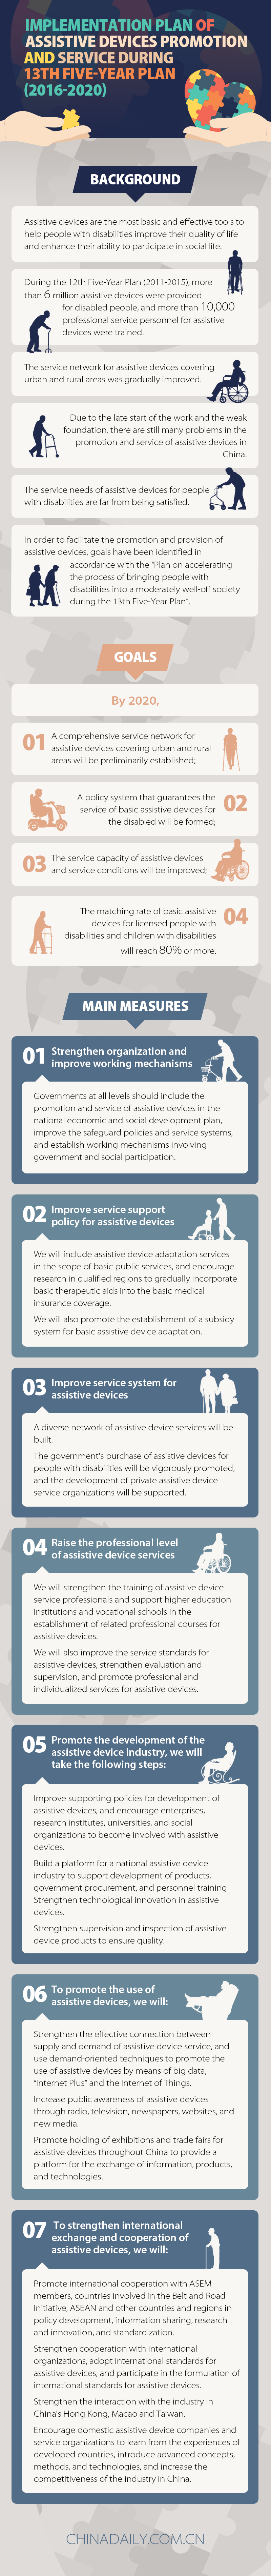 Implementation plan of assistive devices promotion and service during 13th Five-Year Plan (2016-2020)